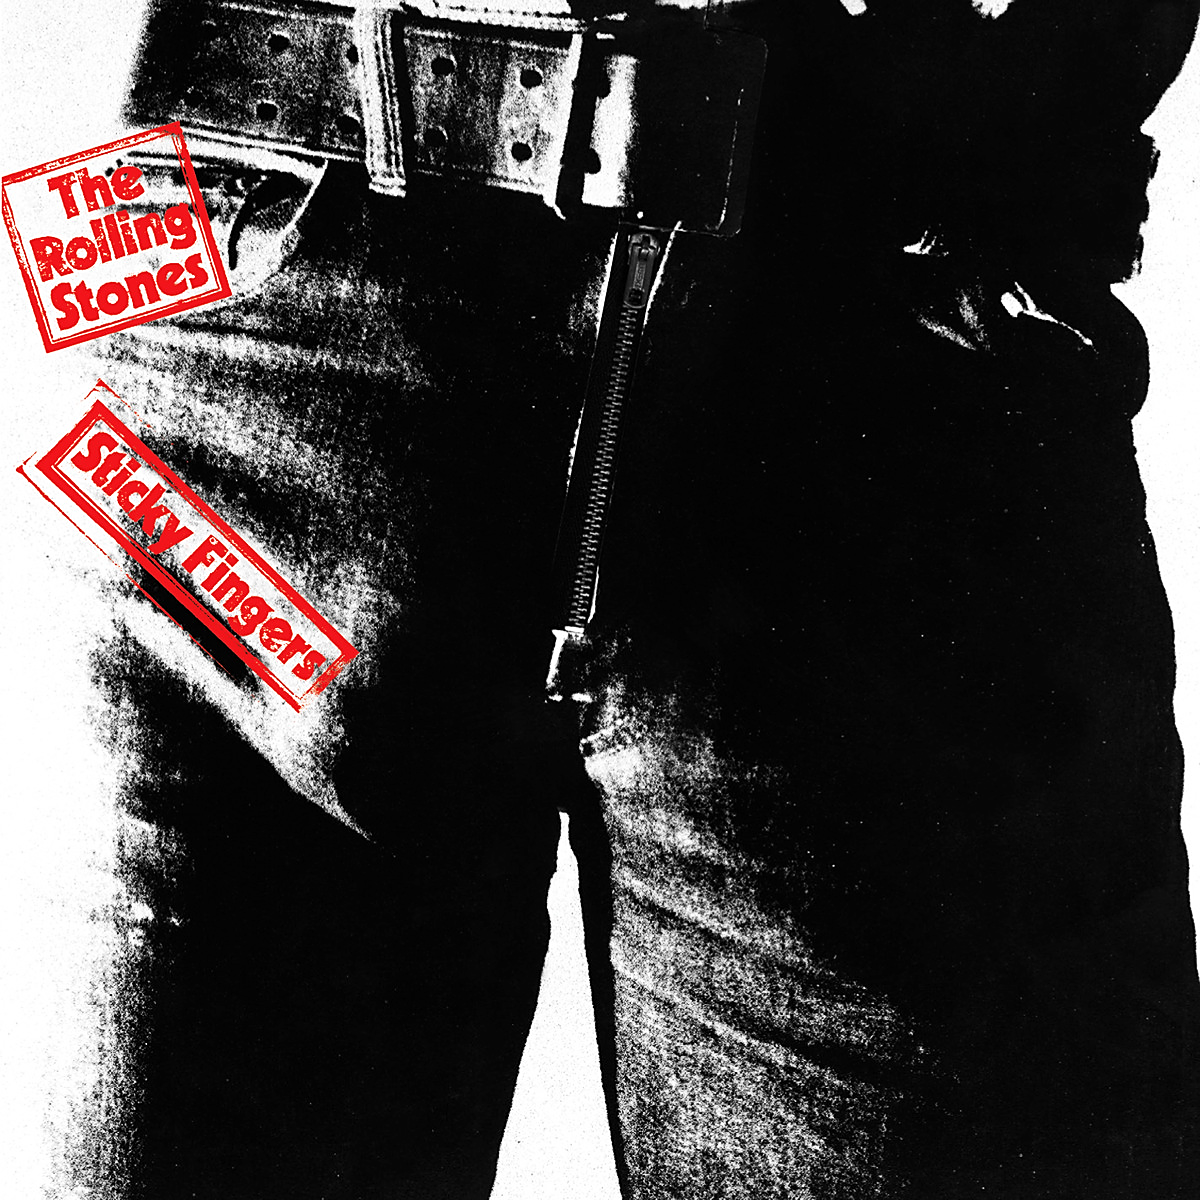 The Rolling Stones-Sticky Fingers-24-44-WEB-FLAC-REMASTERED DELUXE EDITION-2020-OBZEN Download